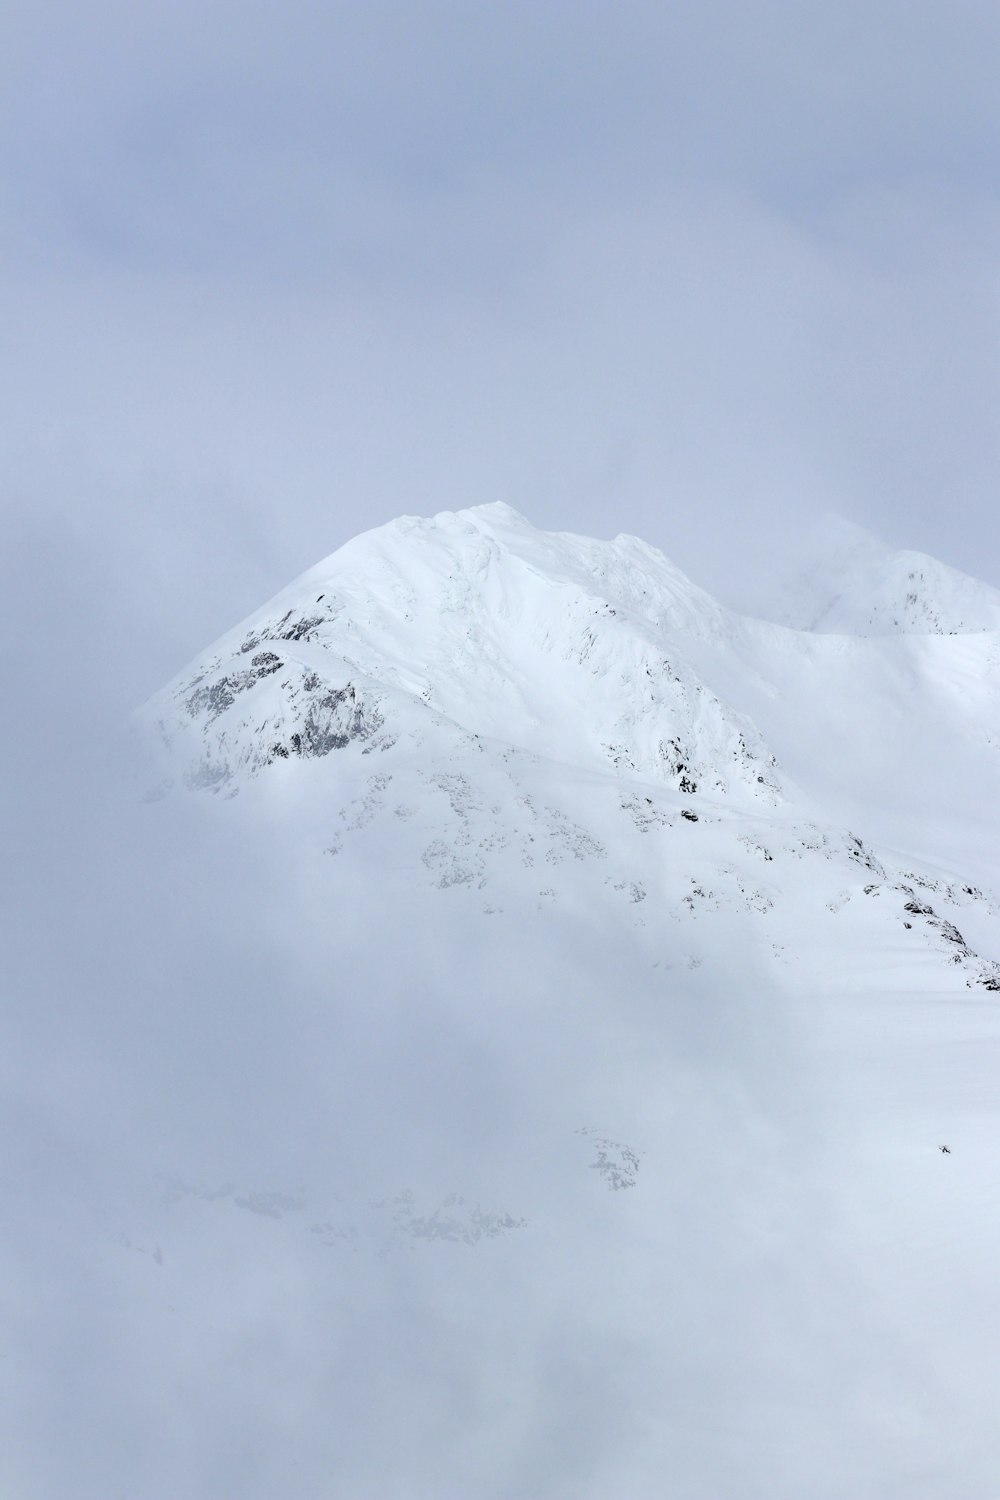 a snow covered mountain with a person on skis